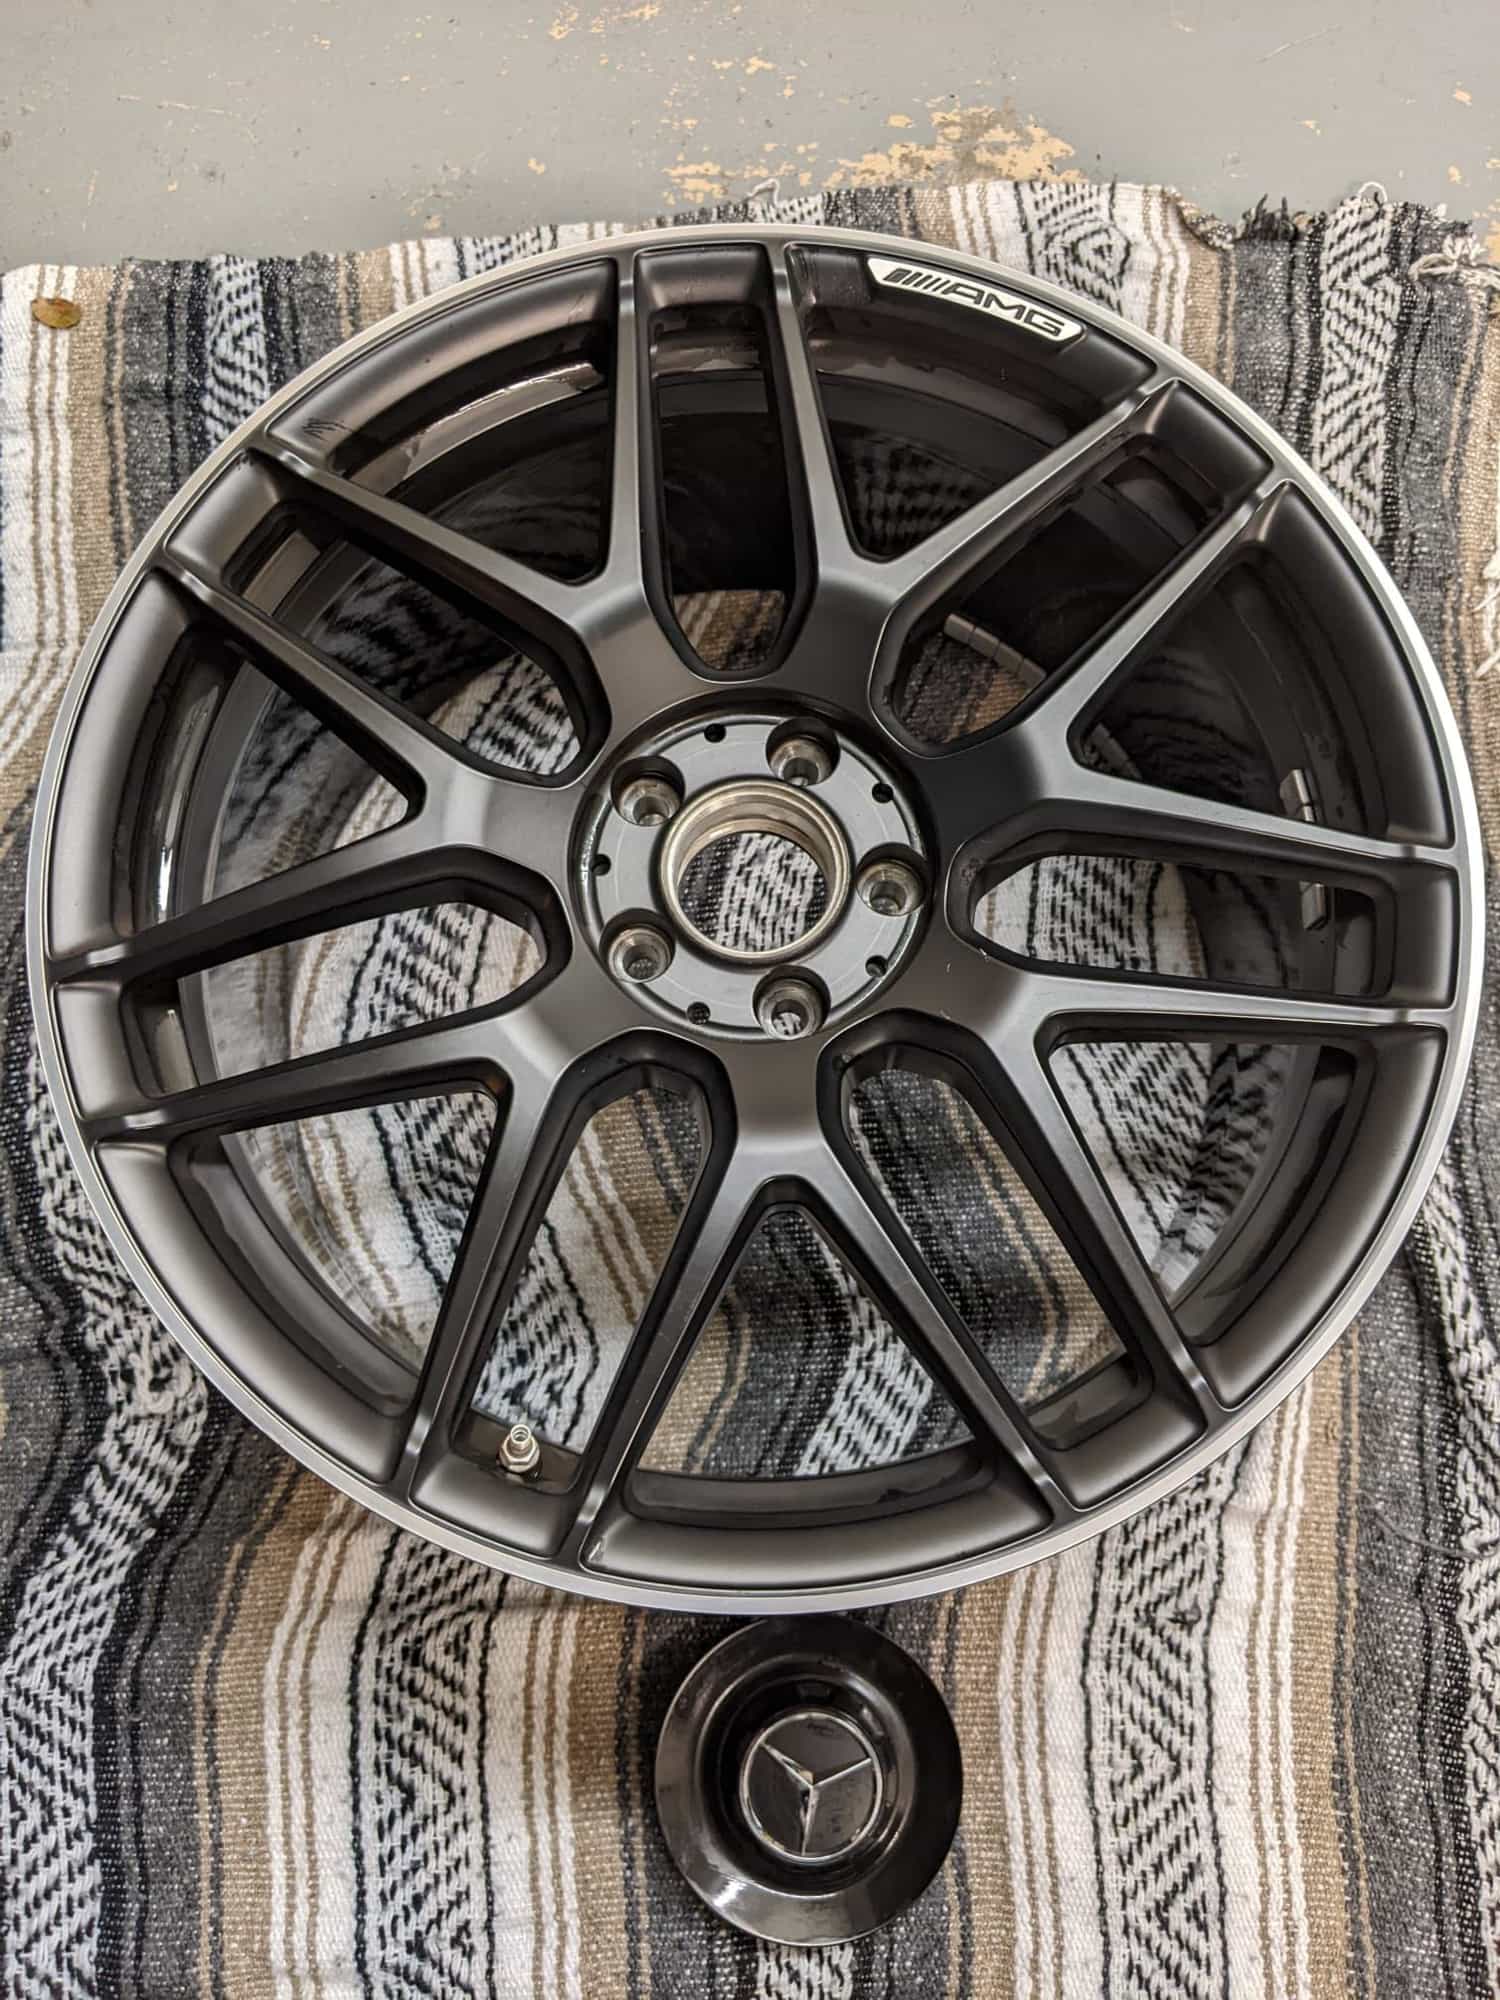 Wheels and Tires/Axles - MERCEDES OEM WHEELS for E63s W213 - Used - 2018 to 2021 Mercedes-Benz E63 AMG S - Weston, FL 33332, United States